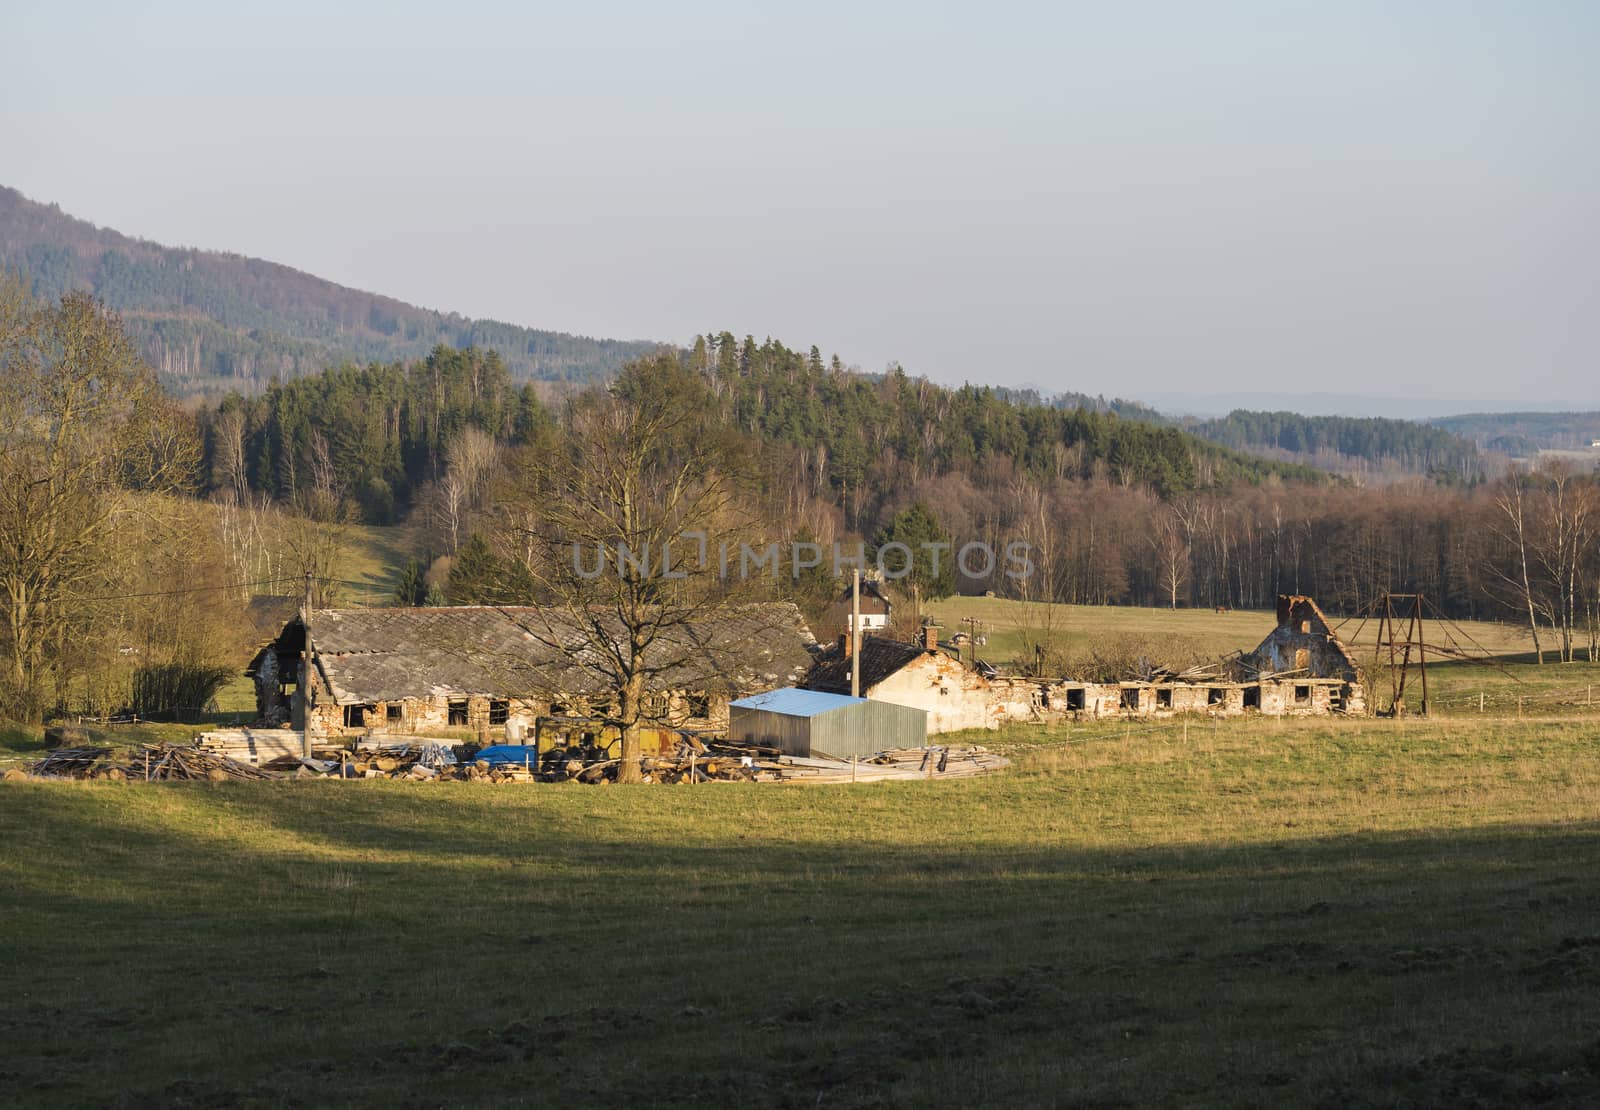 Old ruin of abandoned farm house at Lusatian mountains, early spring landscape with grass meadow, bare trees, forest, hills, clear blue sky background, golden hour light, horizontal, copy space.